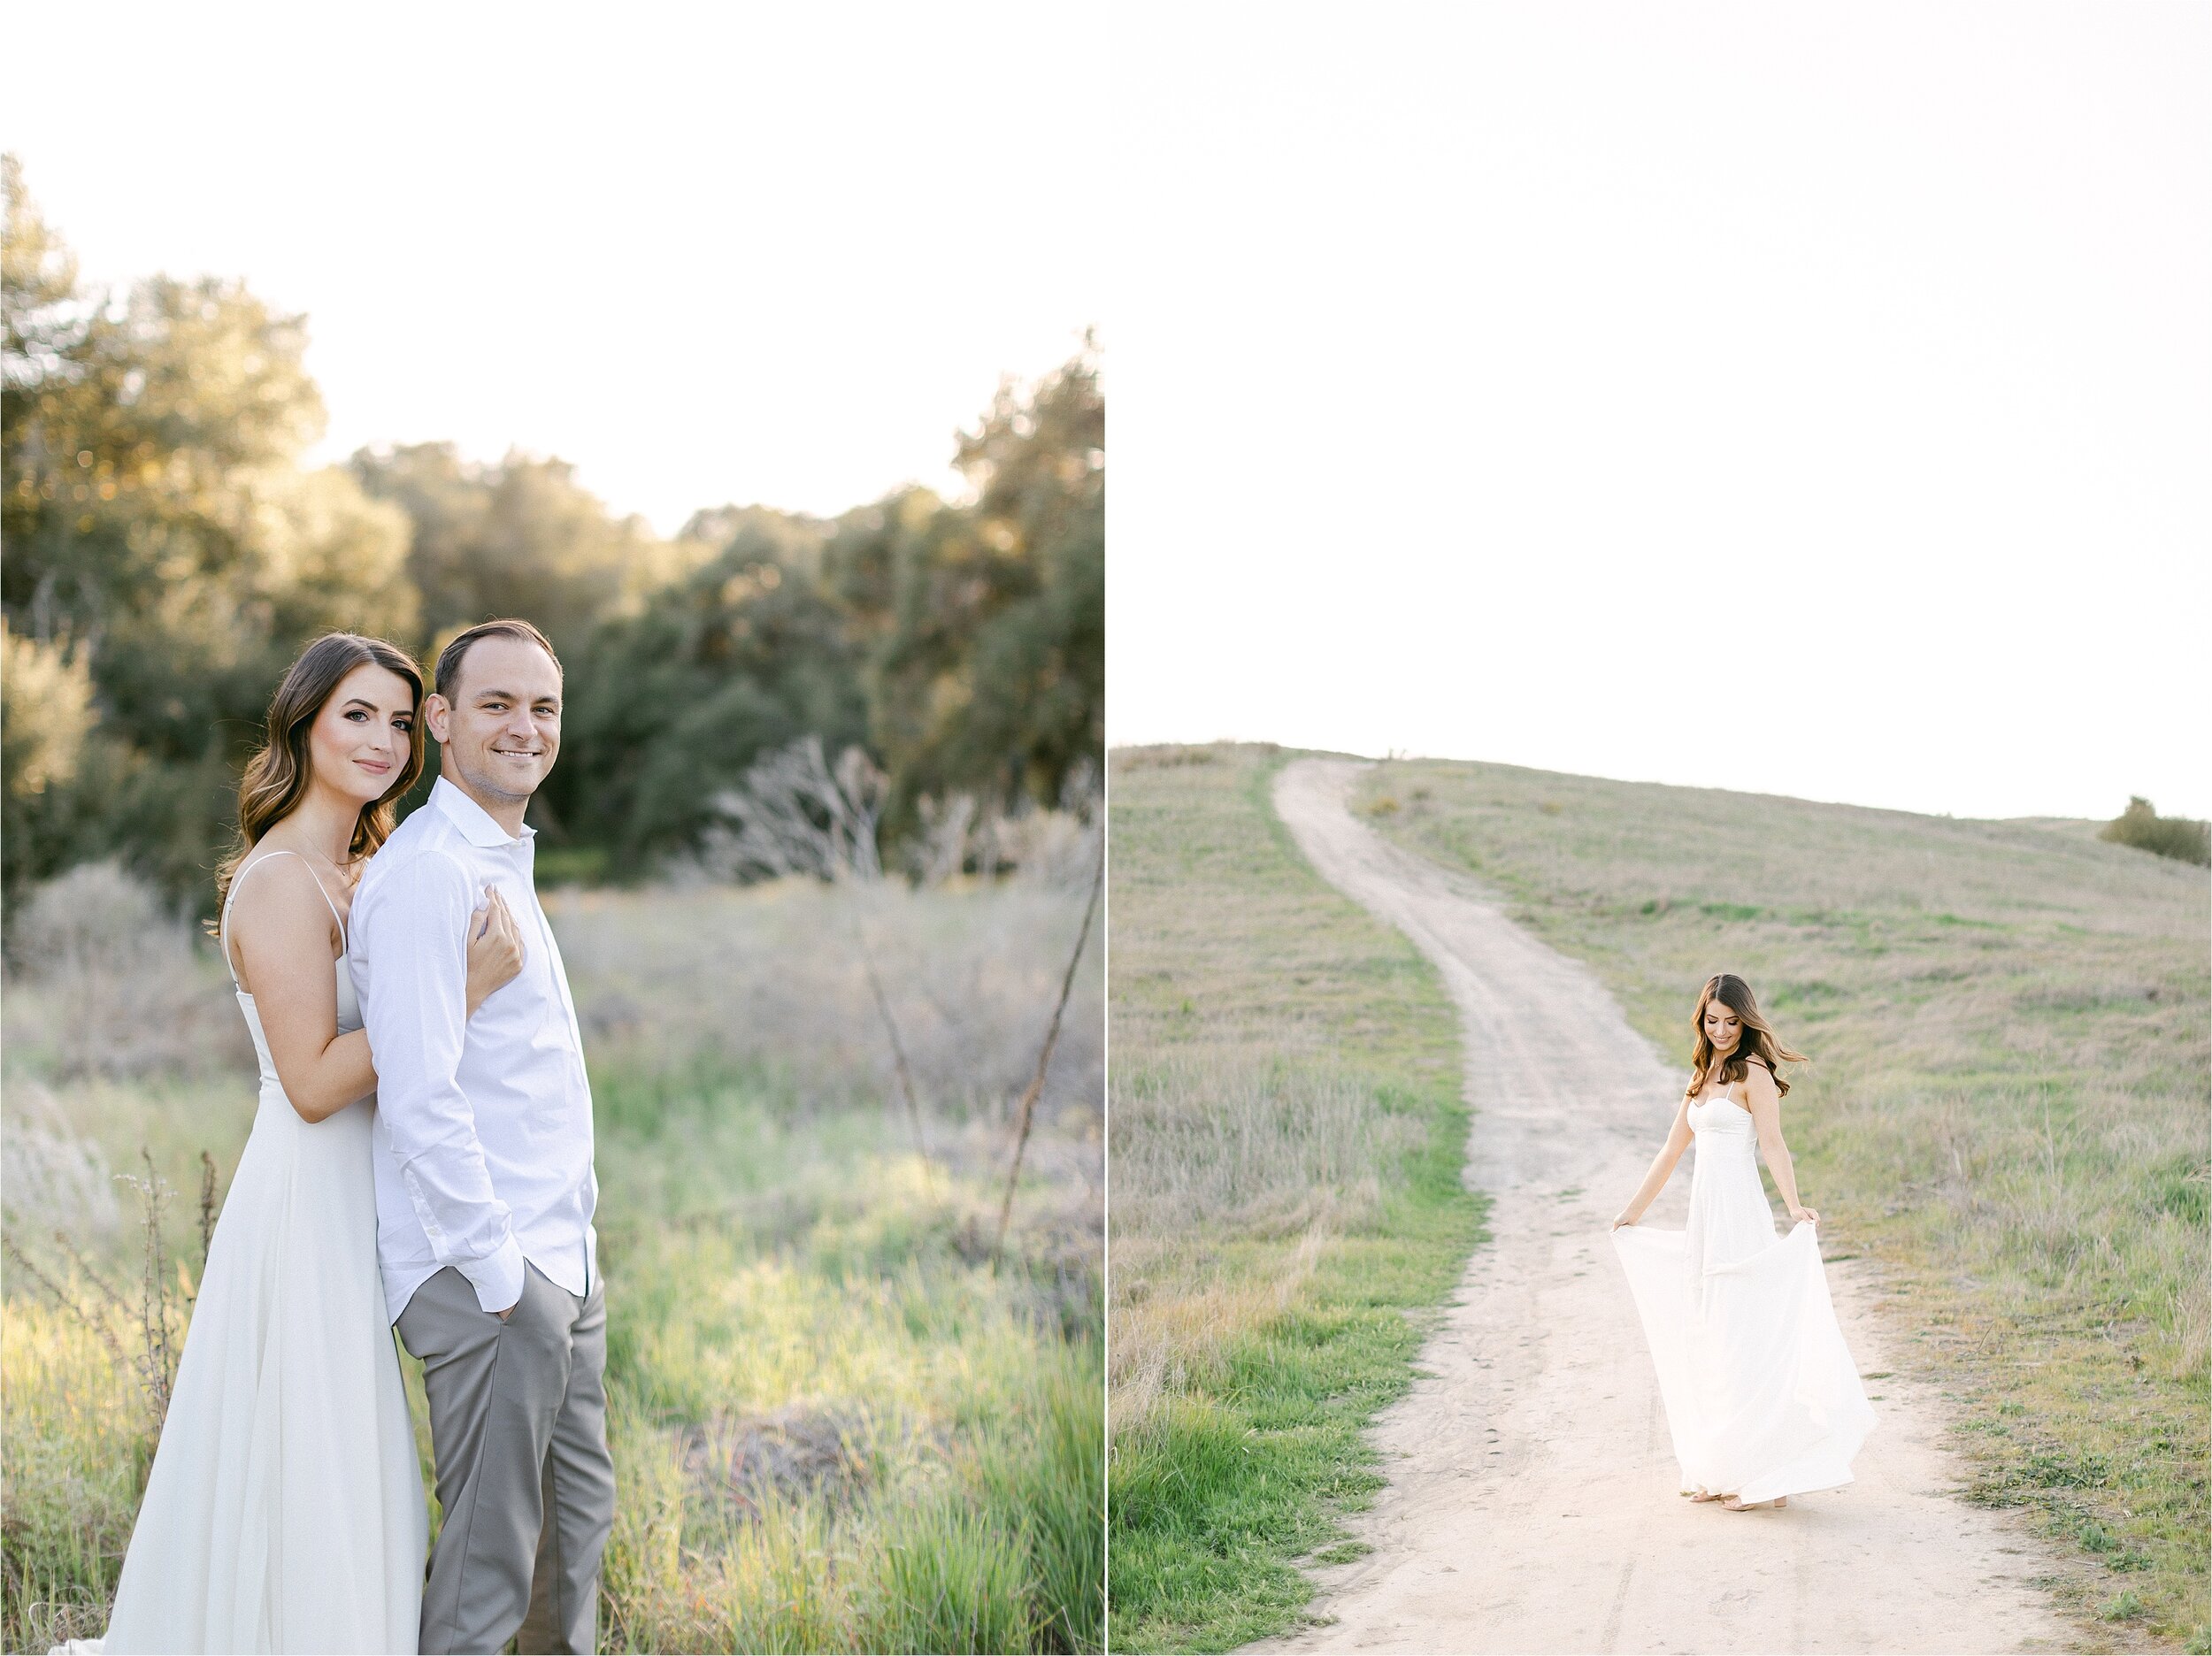 Bride-to-be, wearing a white flowy dress, snuggles into her fiance who is wearing grey pants and a white button down while taking their Orange County engagement photos.